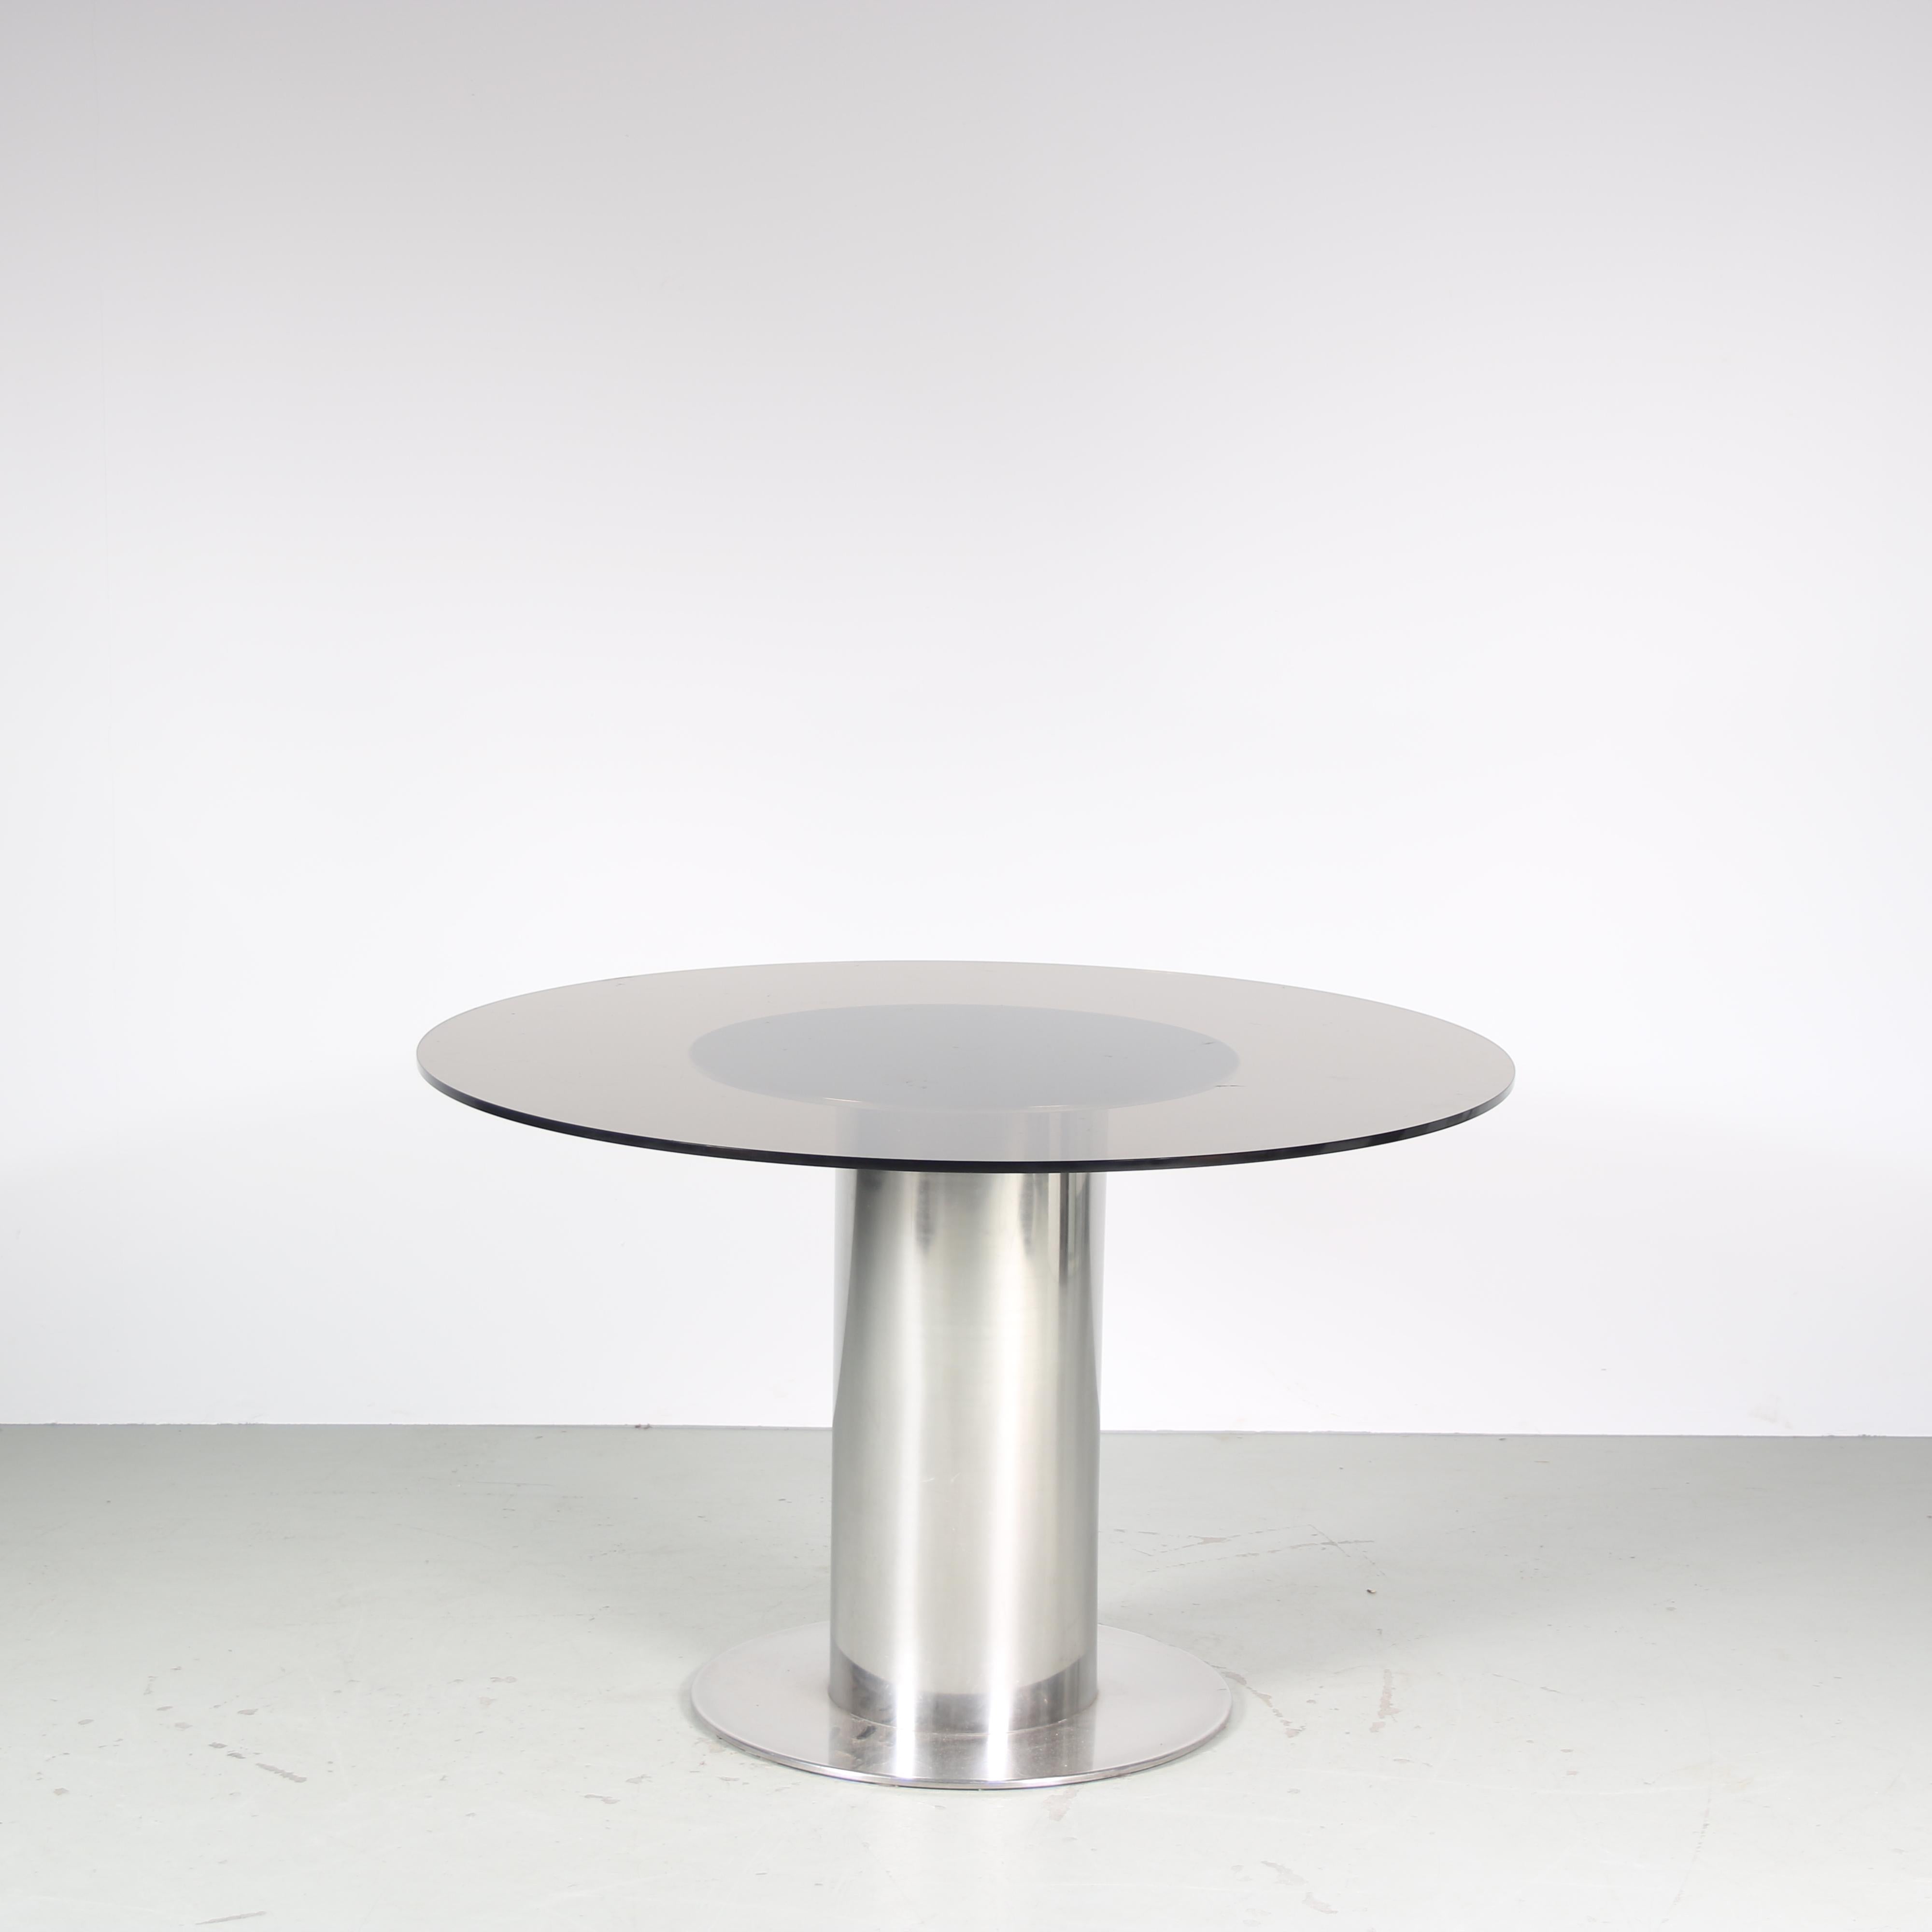 European “Cidonio” Dining Table by Antonia Astori for Cidue, Italy 1960 For Sale